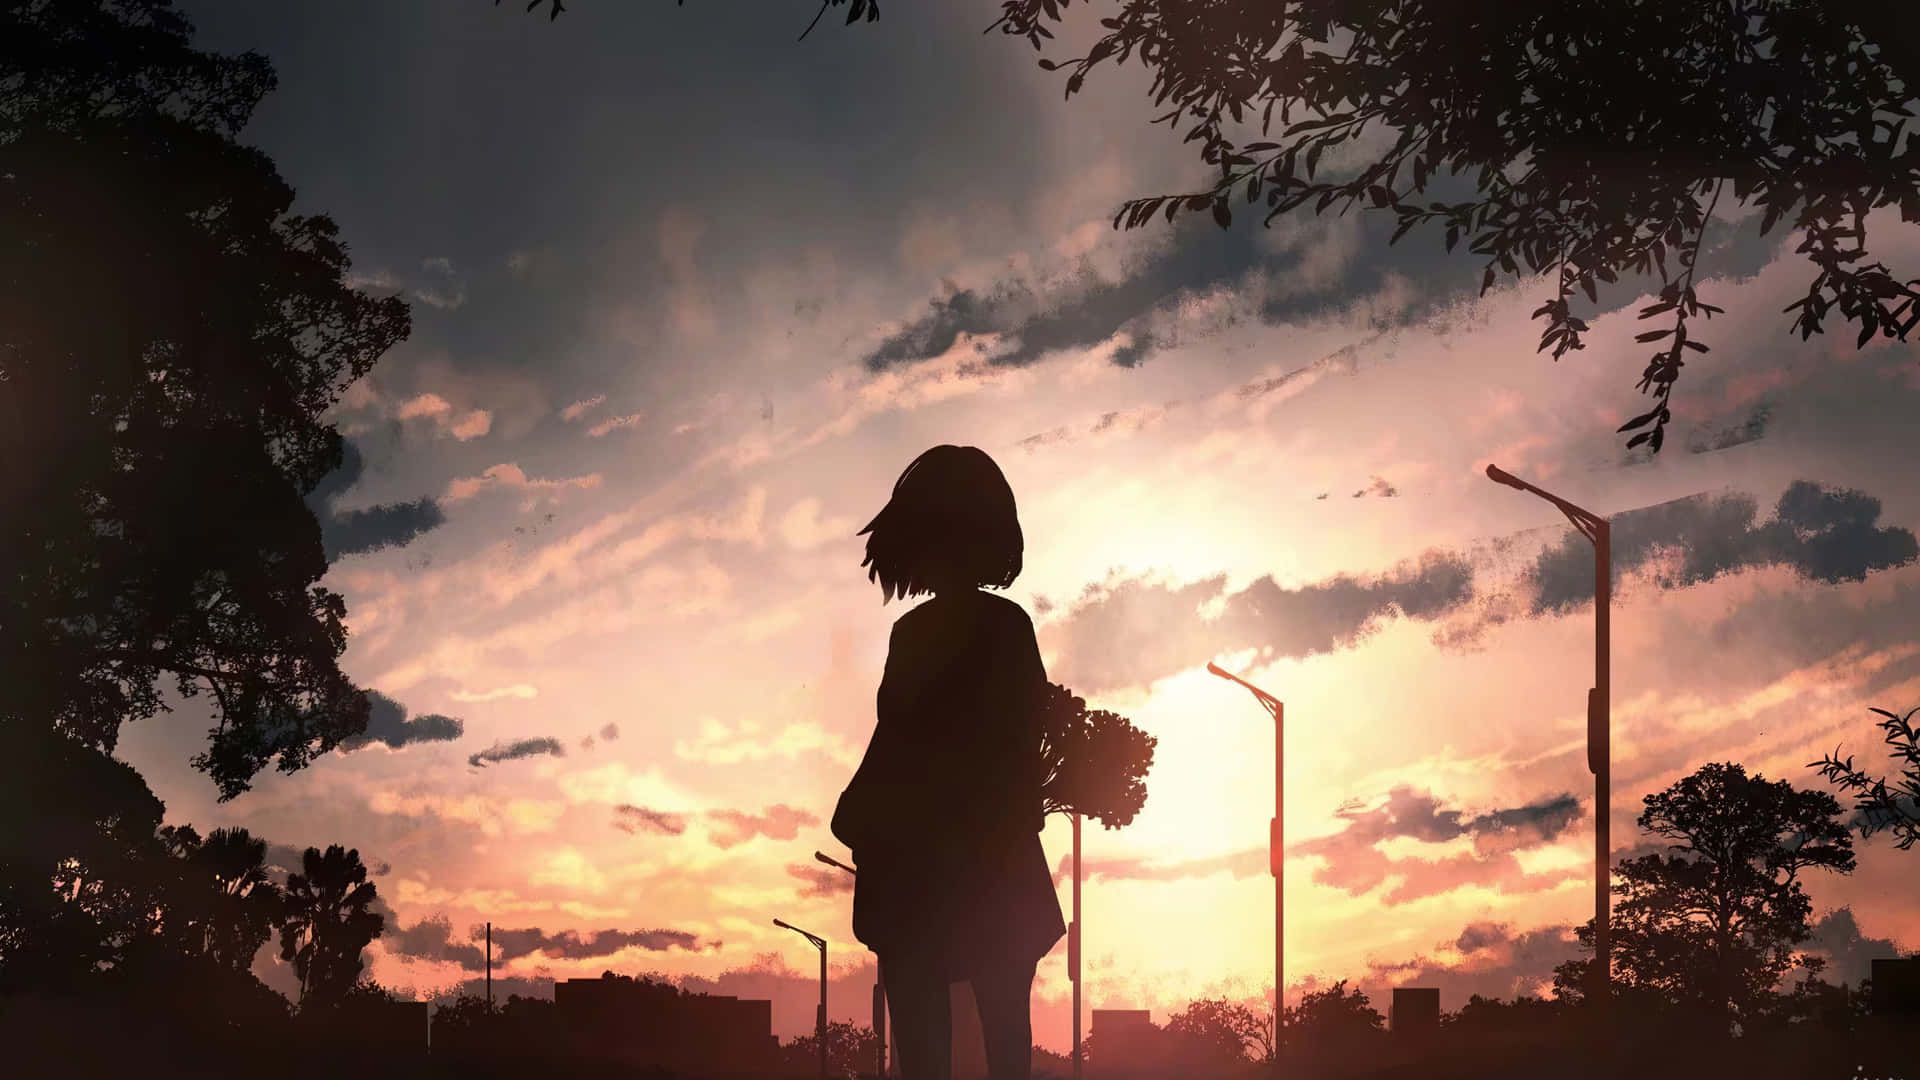 Anime Sunset With Girl Silhouette Wallpaper